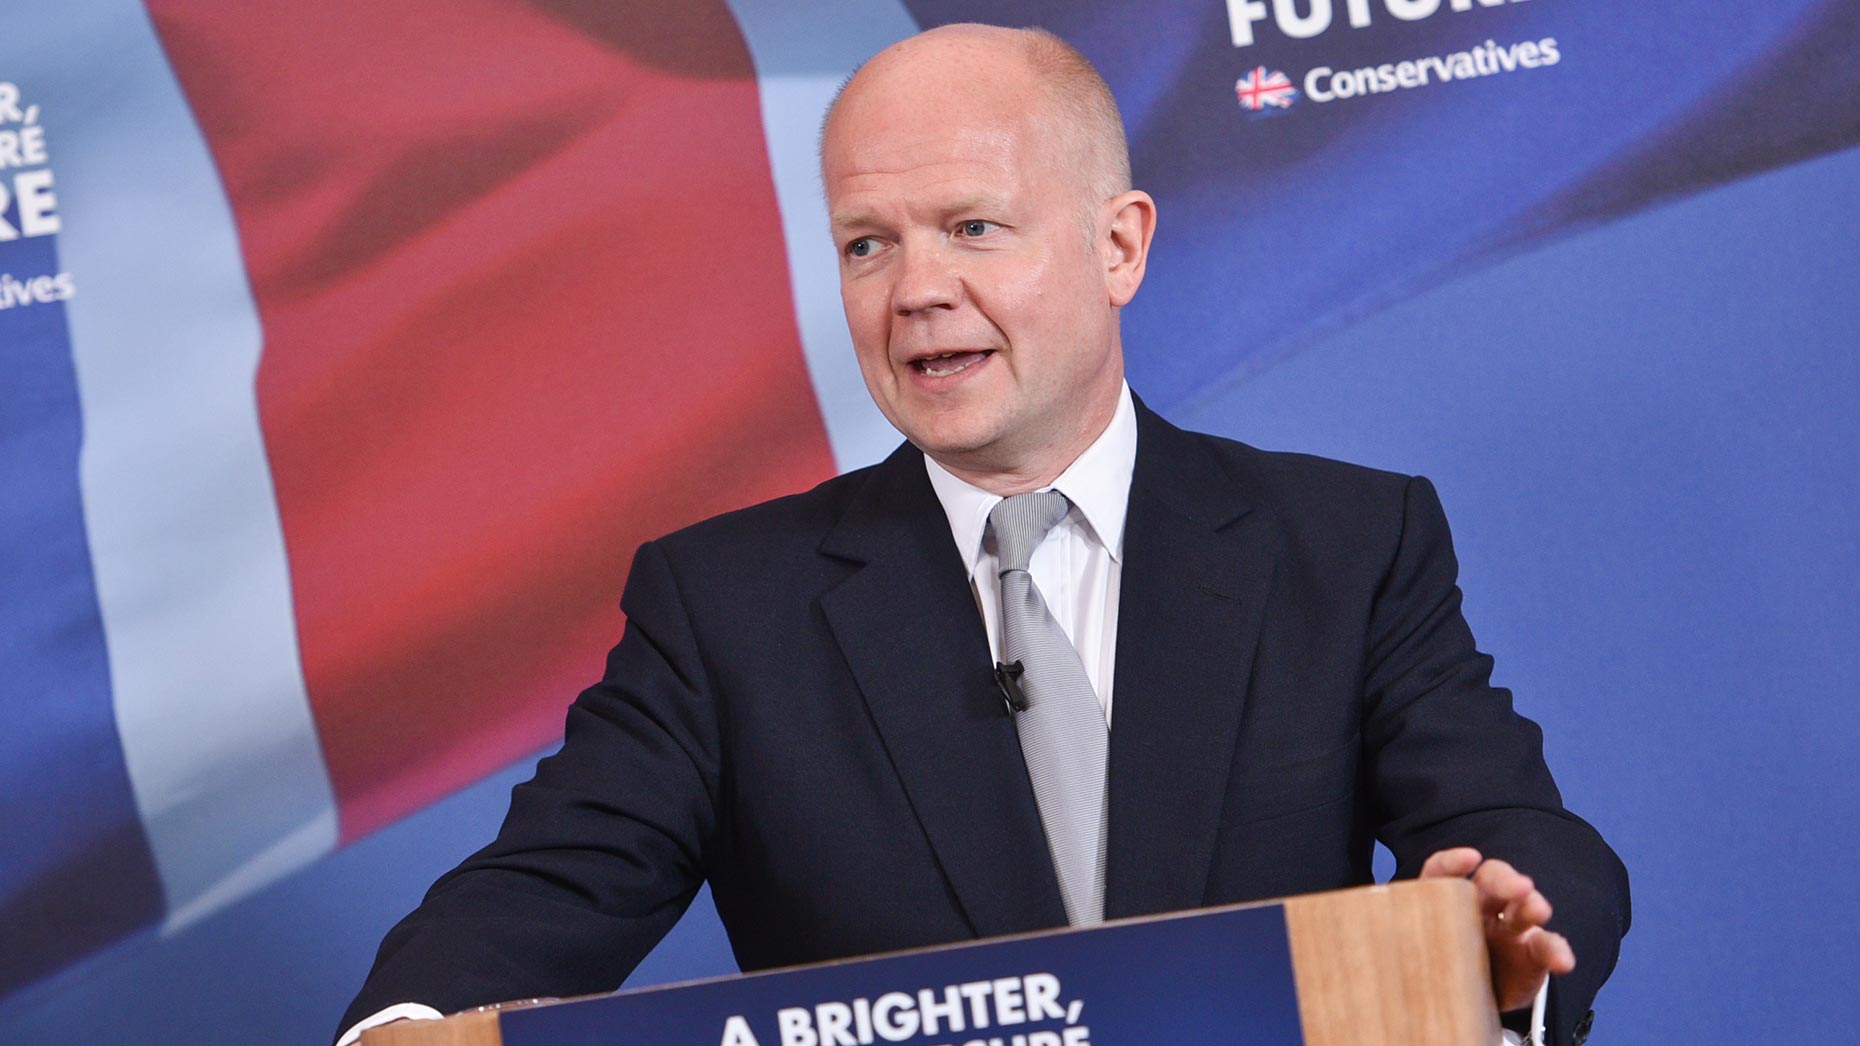 William Hague. Photo: Steve Smailes for The Lincolnite